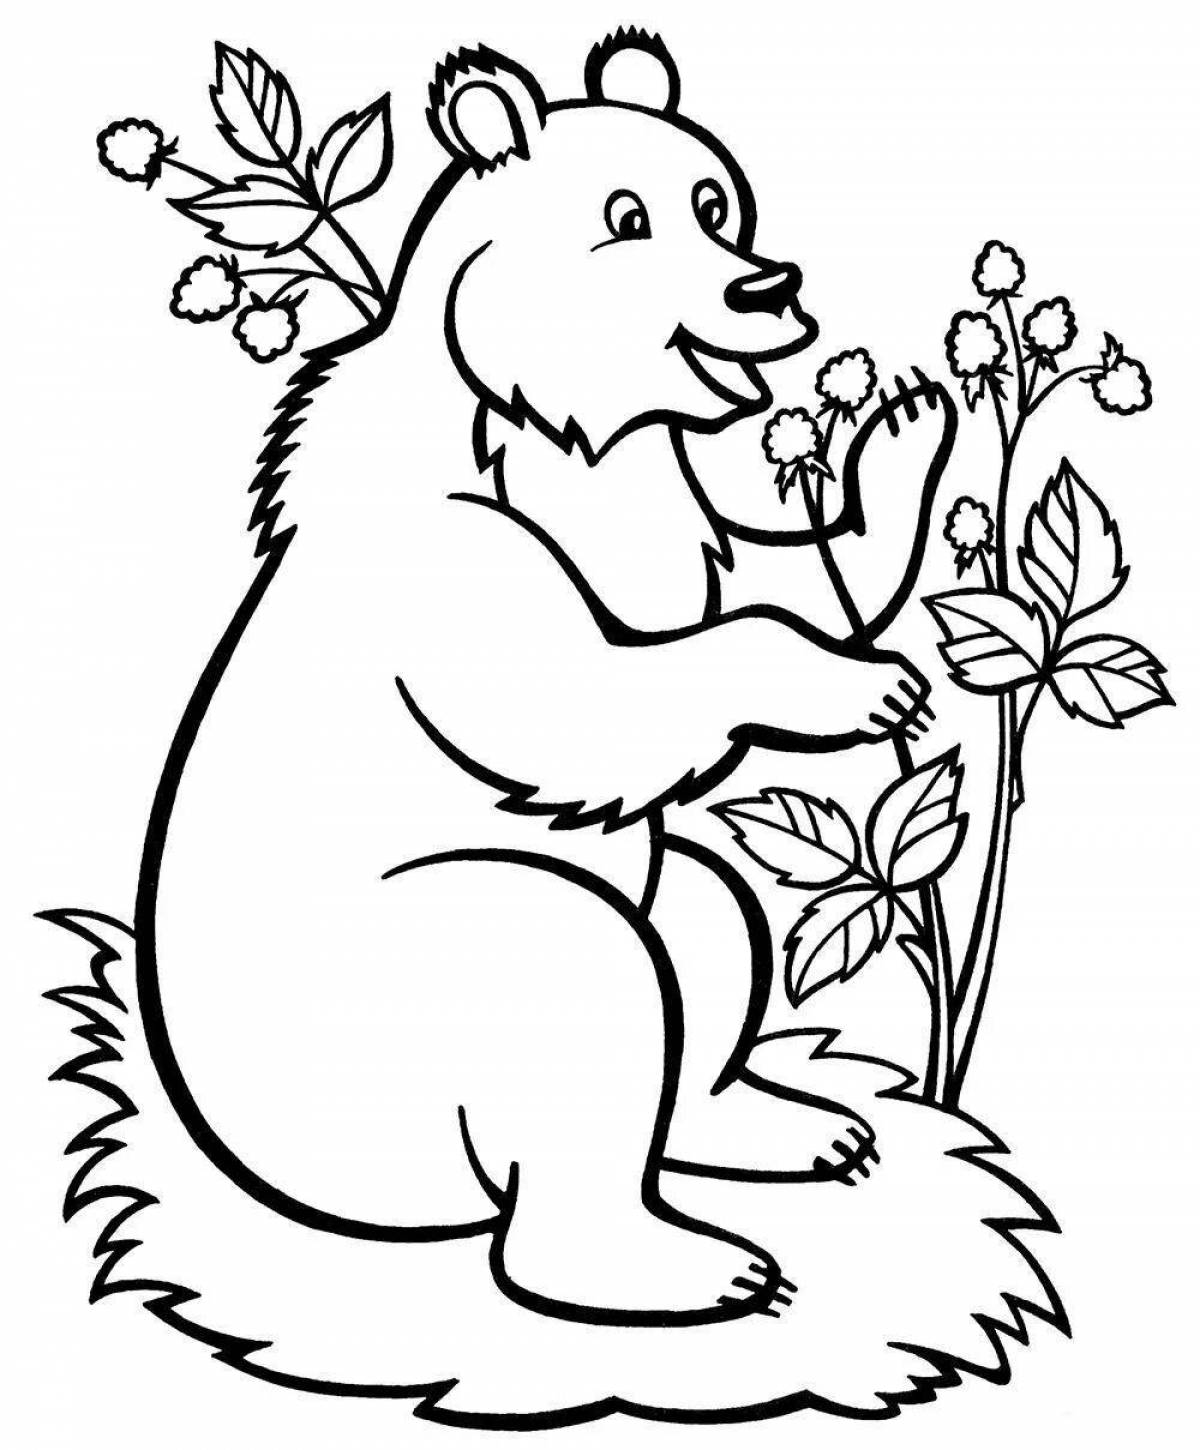 Coloring page adorable bear in the forest